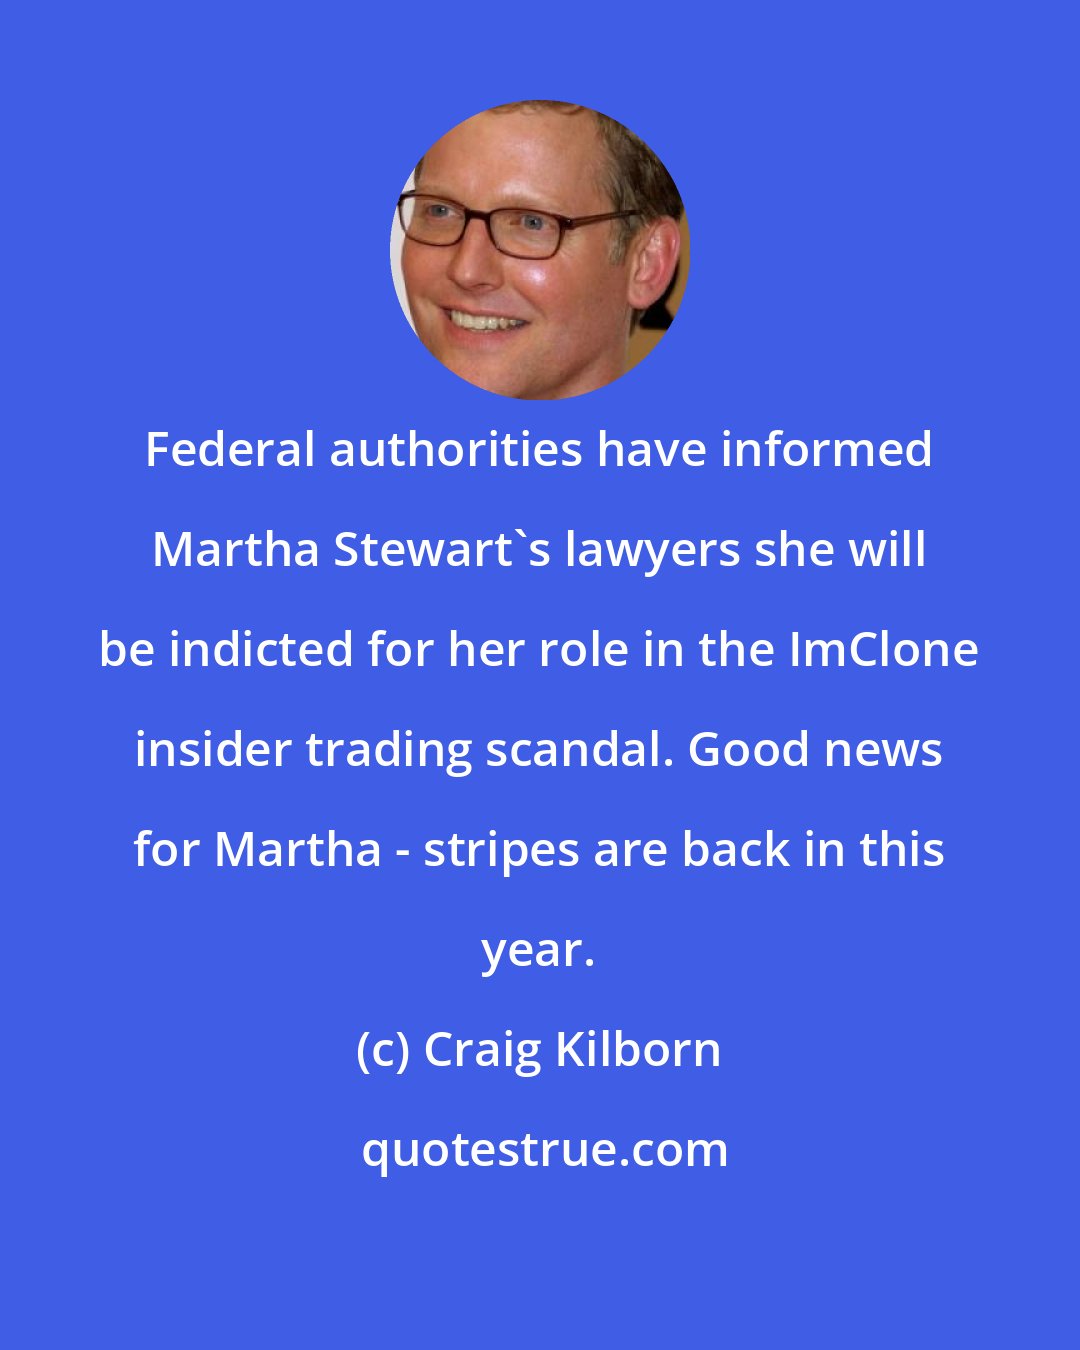 Craig Kilborn: Federal authorities have informed Martha Stewart's lawyers she will be indicted for her role in the ImClone insider trading scandal. Good news for Martha - stripes are back in this year.